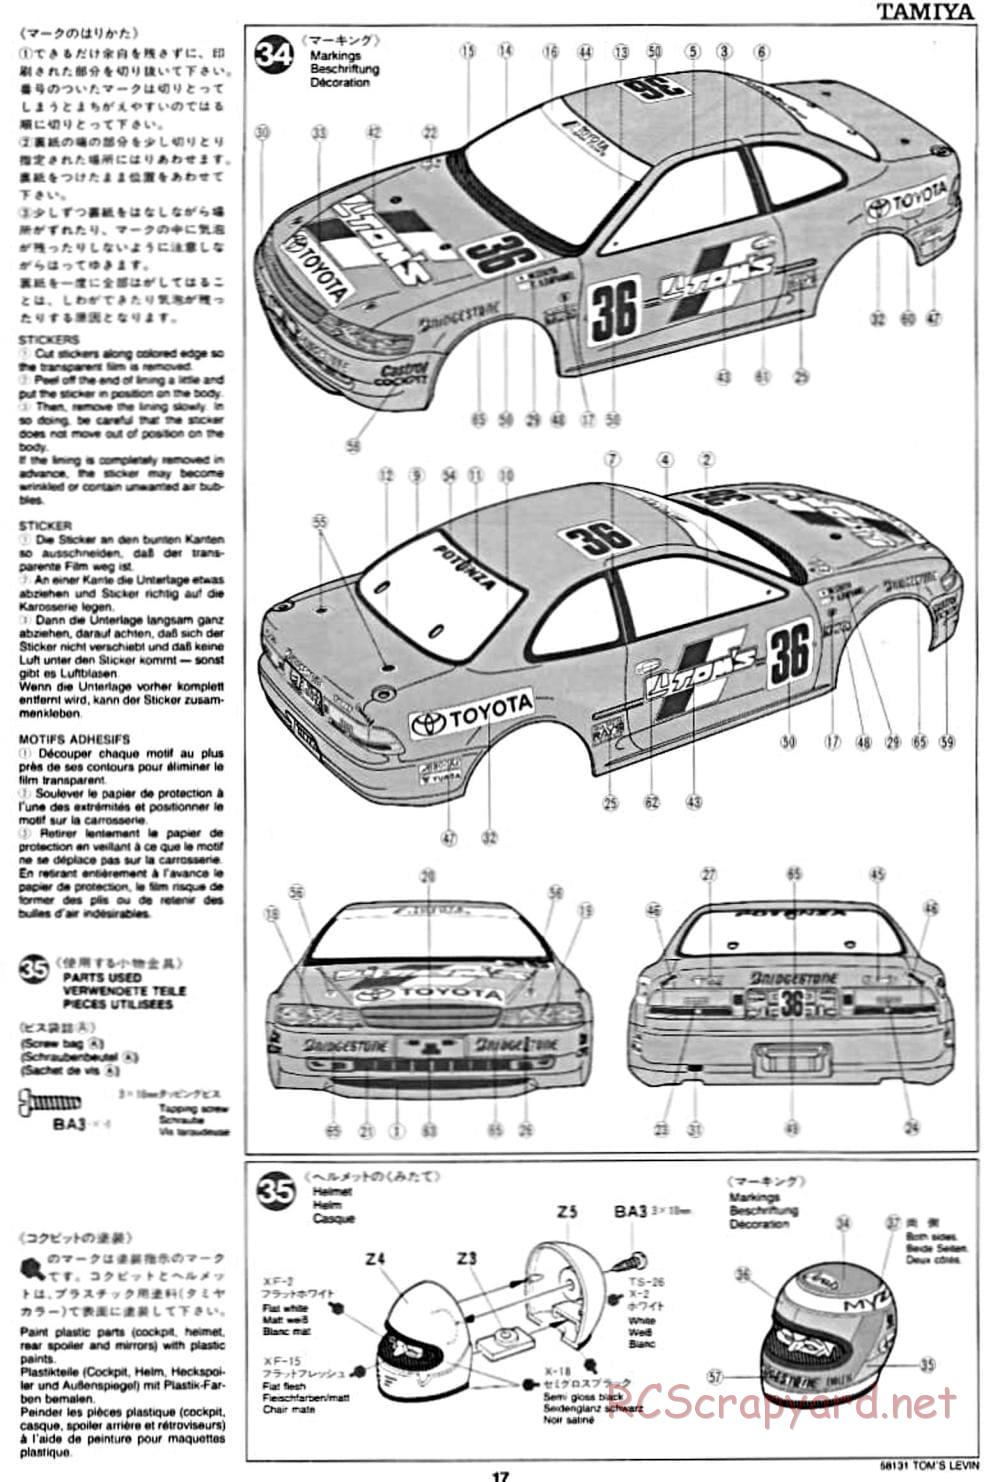 Tamiya - Toyota Tom's Levin - FF-01 Chassis - Manual - Page 17